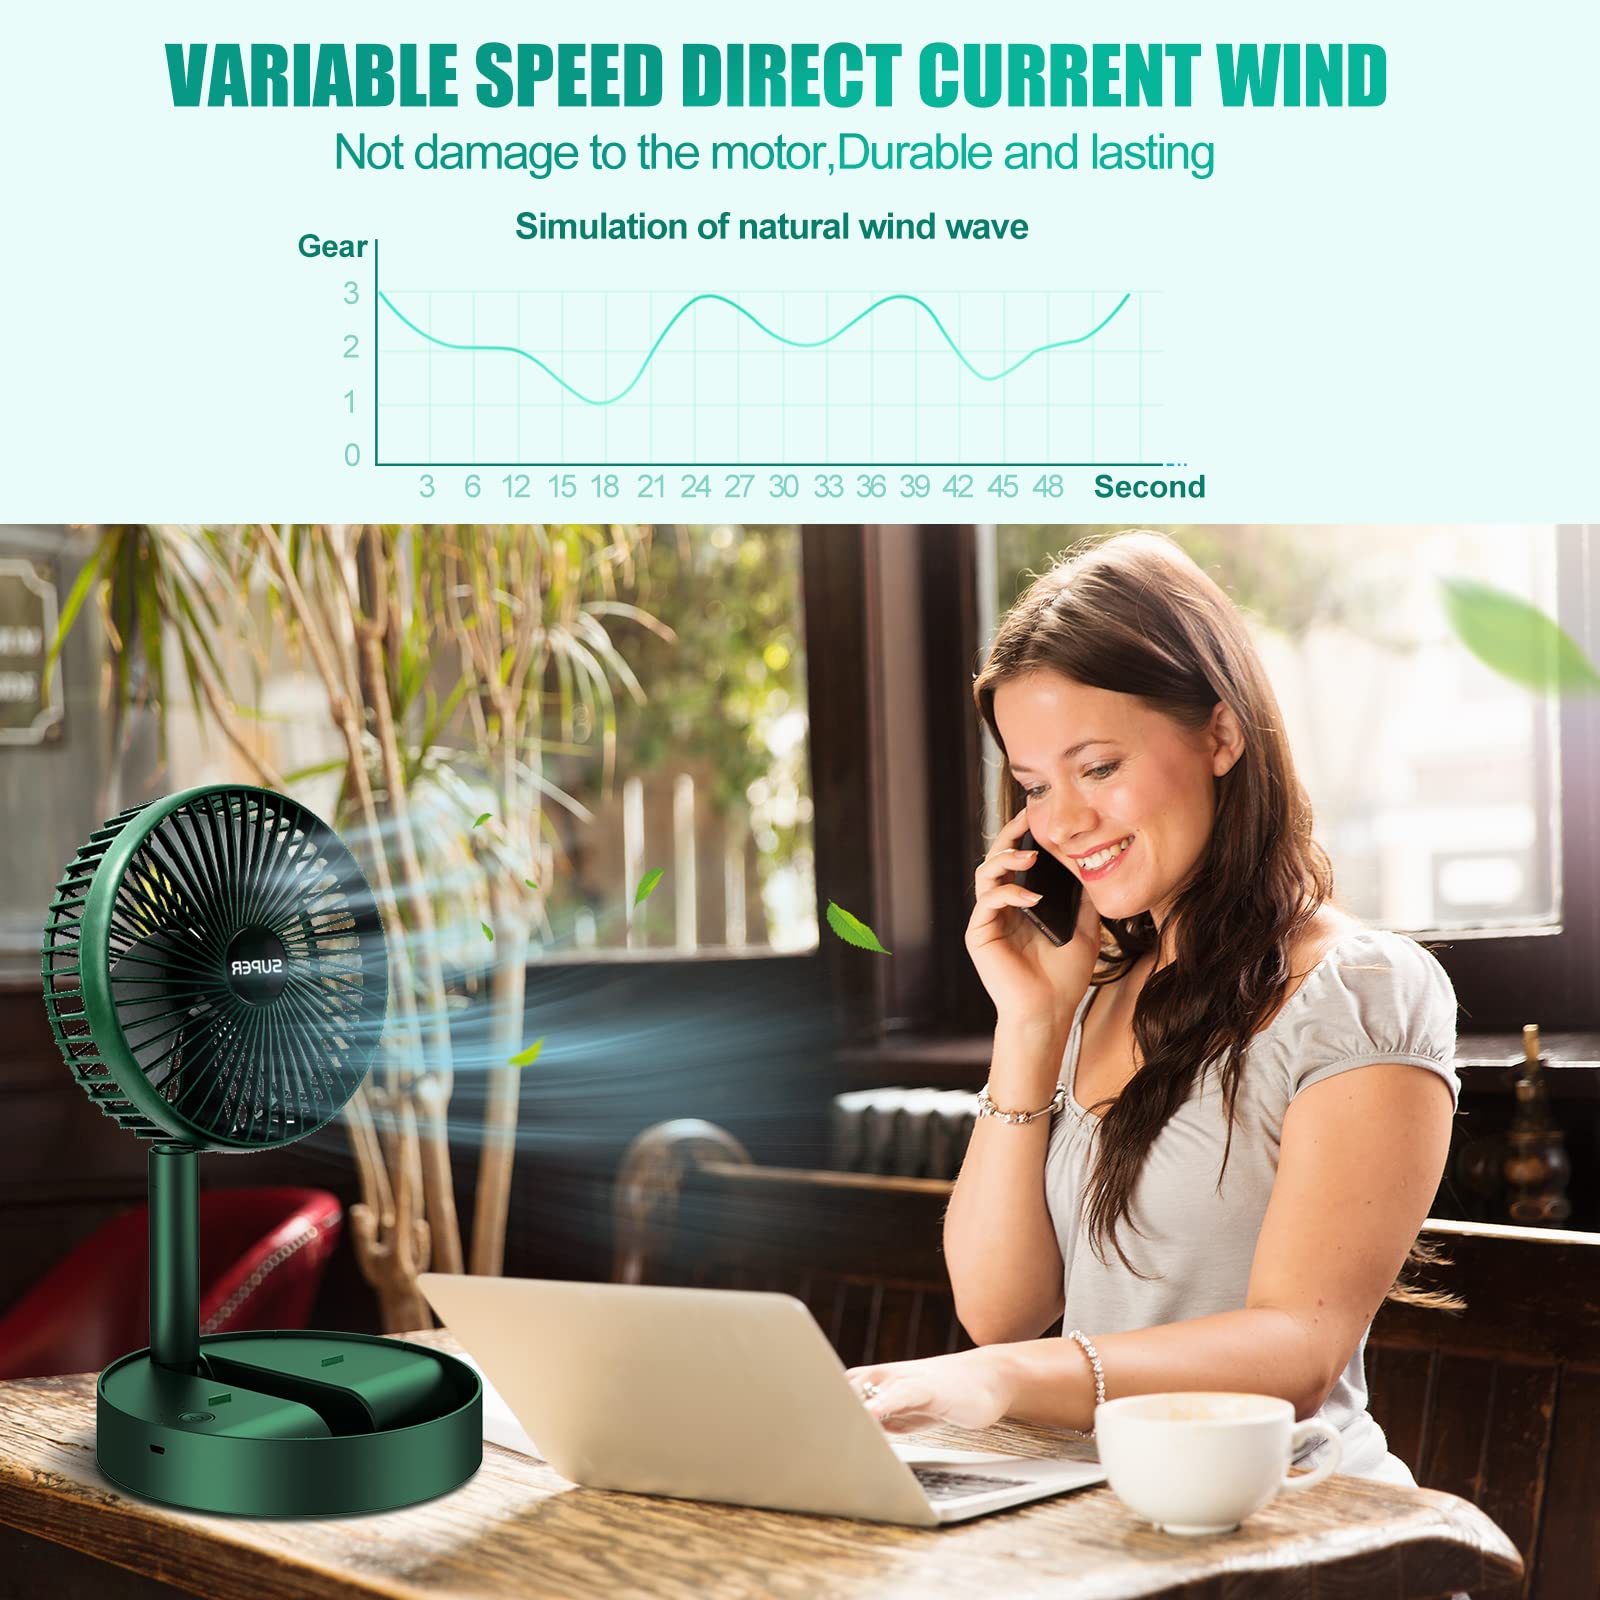 MAESHOP Portable Table Fan 6.5 Inch 3 Speeds Wind Quiet 2000mAh Rechargeable Battery Powered USB Desktop Folding Fan For Home Desk Outdoor Bedroom Office Trave (Green)